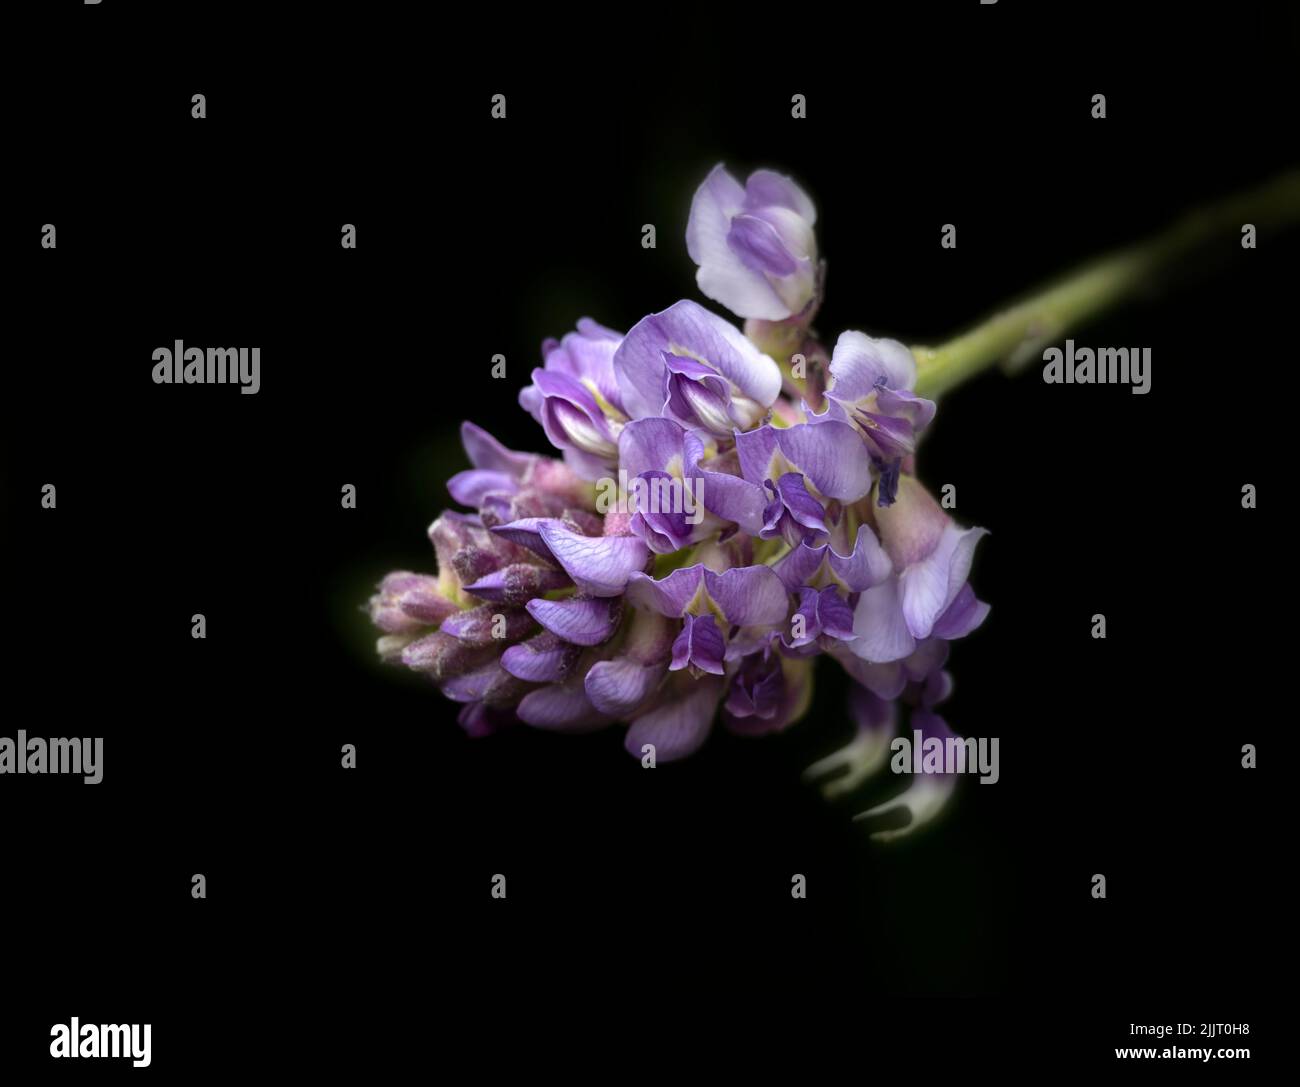 Closeup of flowers of Wisteria frutescens 'Longwood Purple' against a dark background Stock Photo